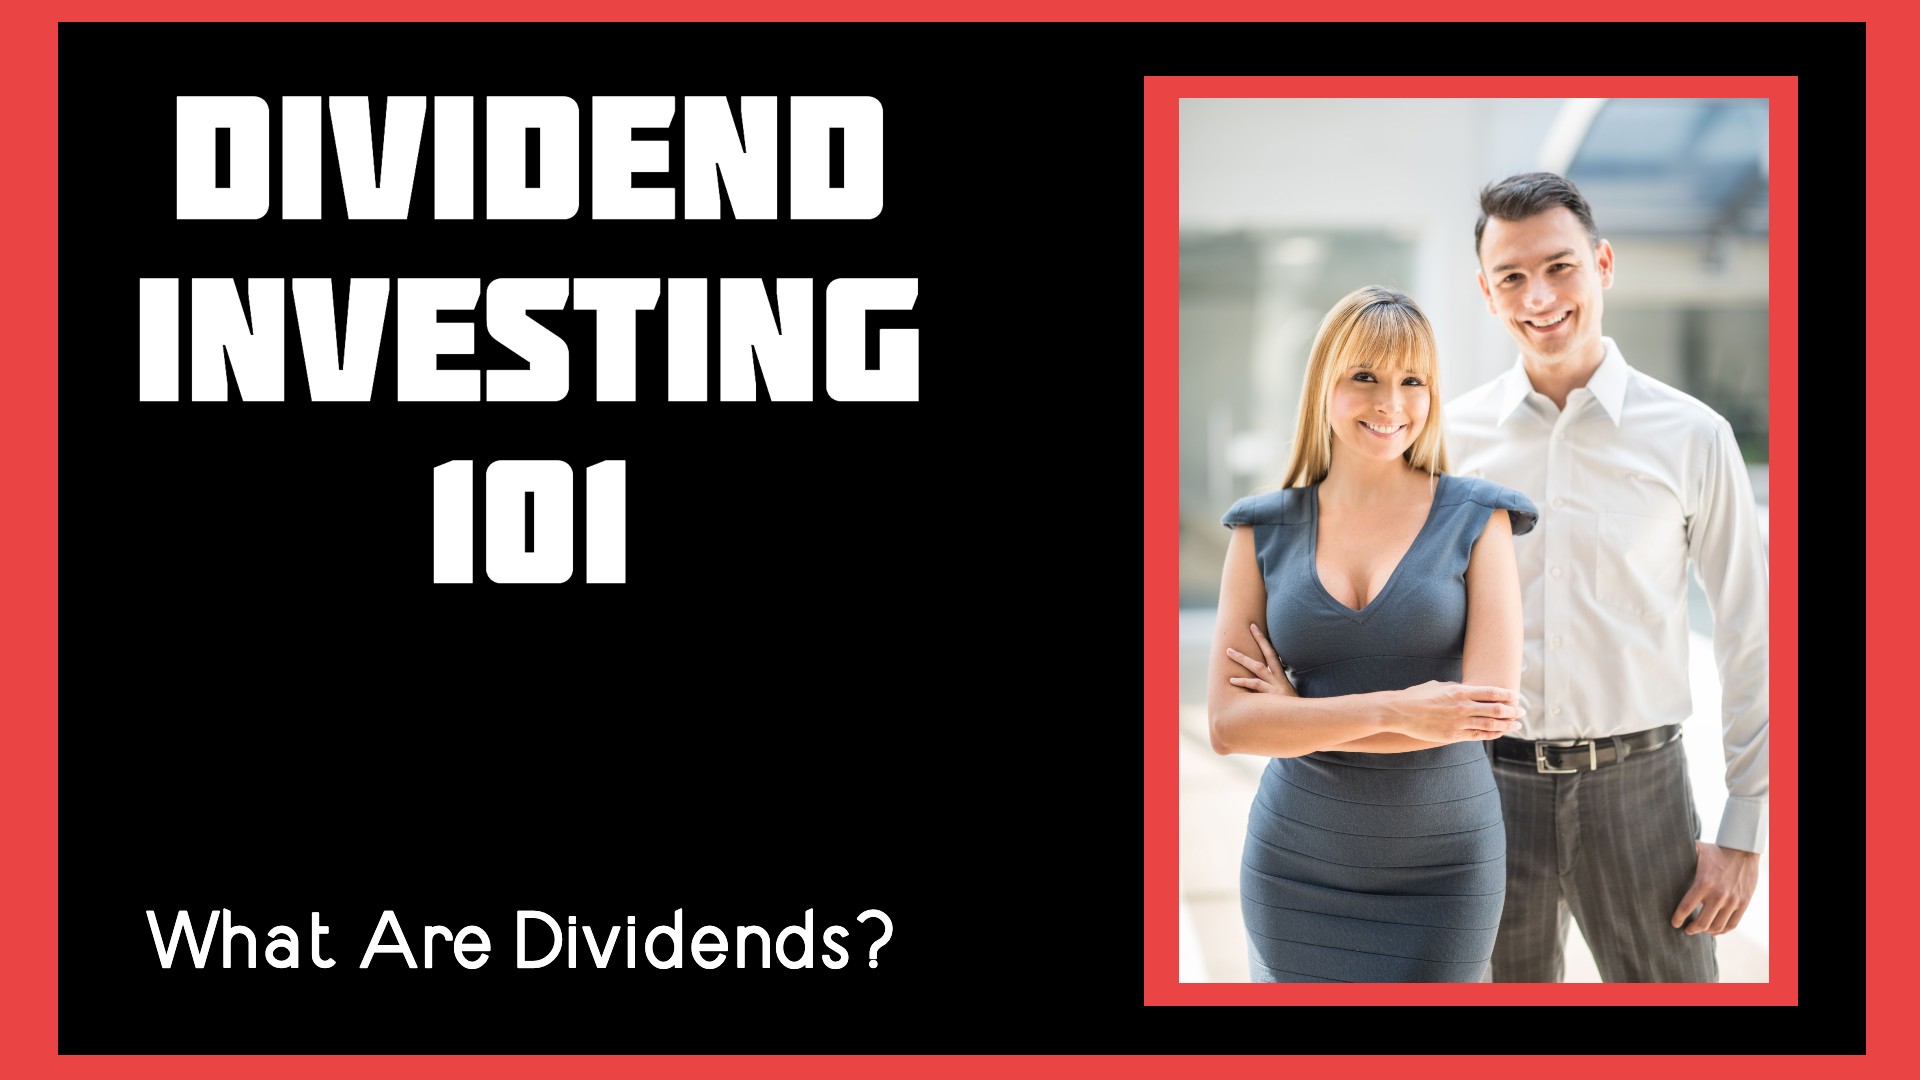 Dividend Investing 101 What Are Dividends